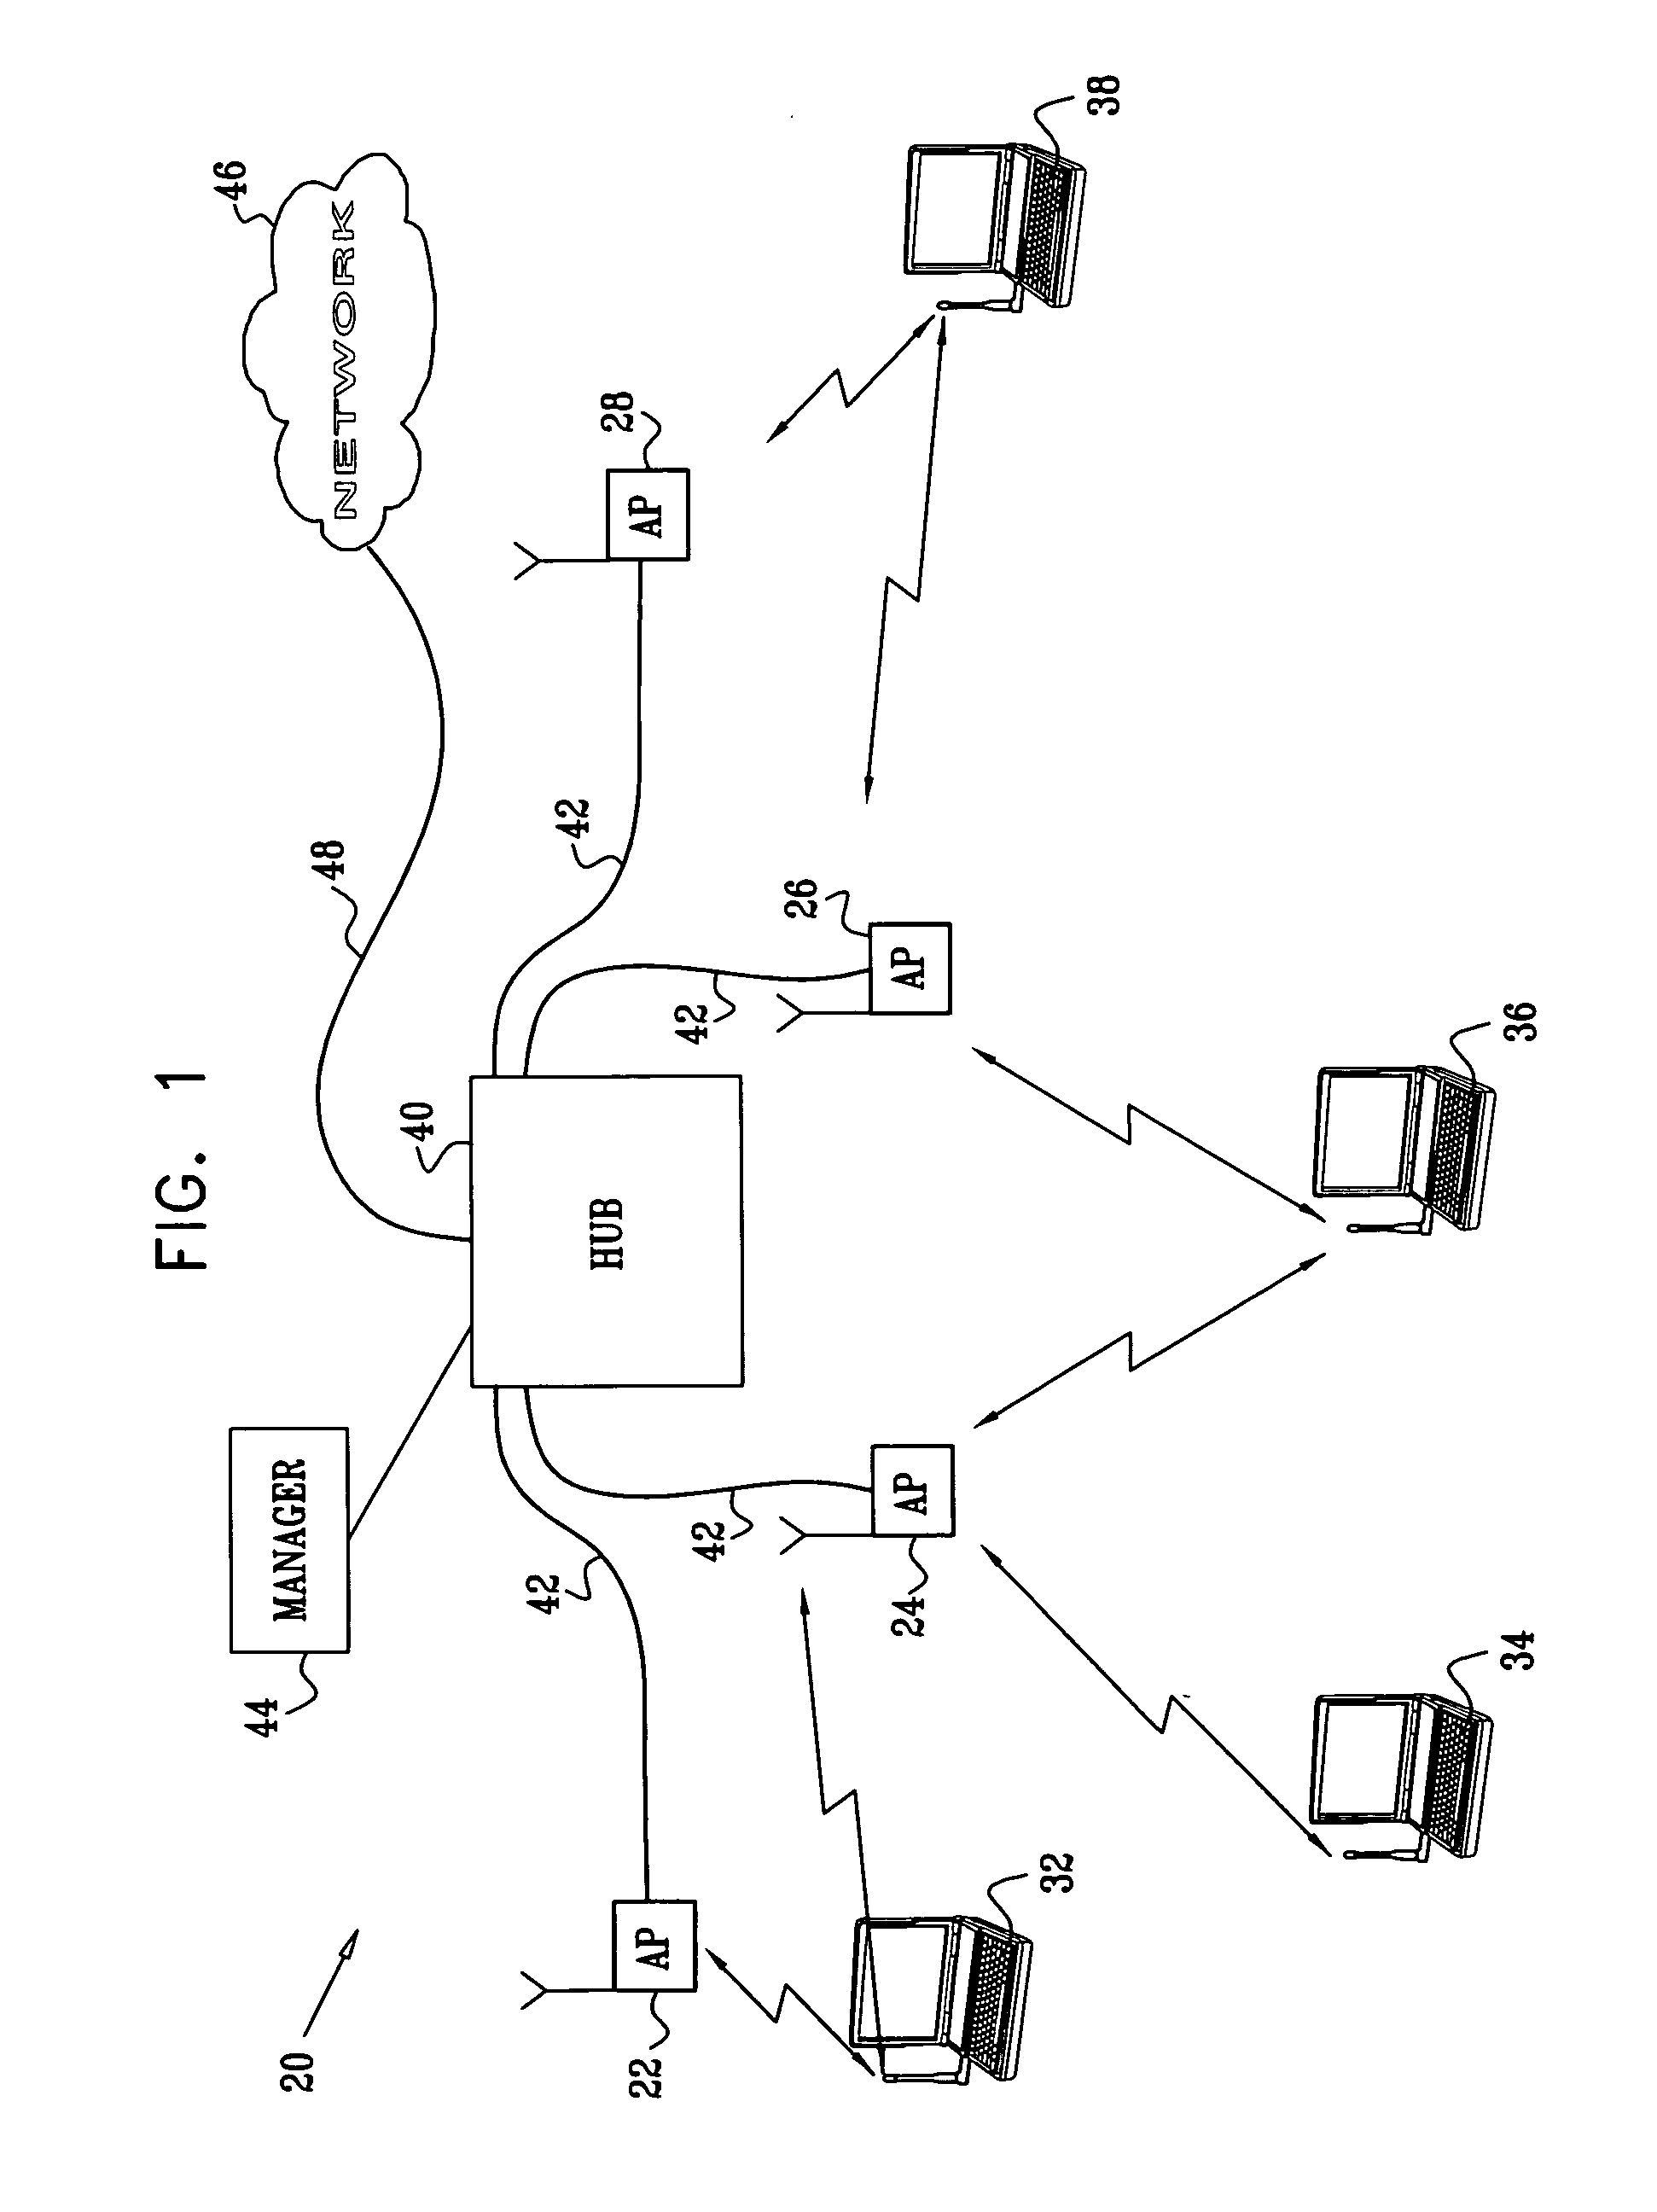 Spatial reuse of frequency channels in a WLAN